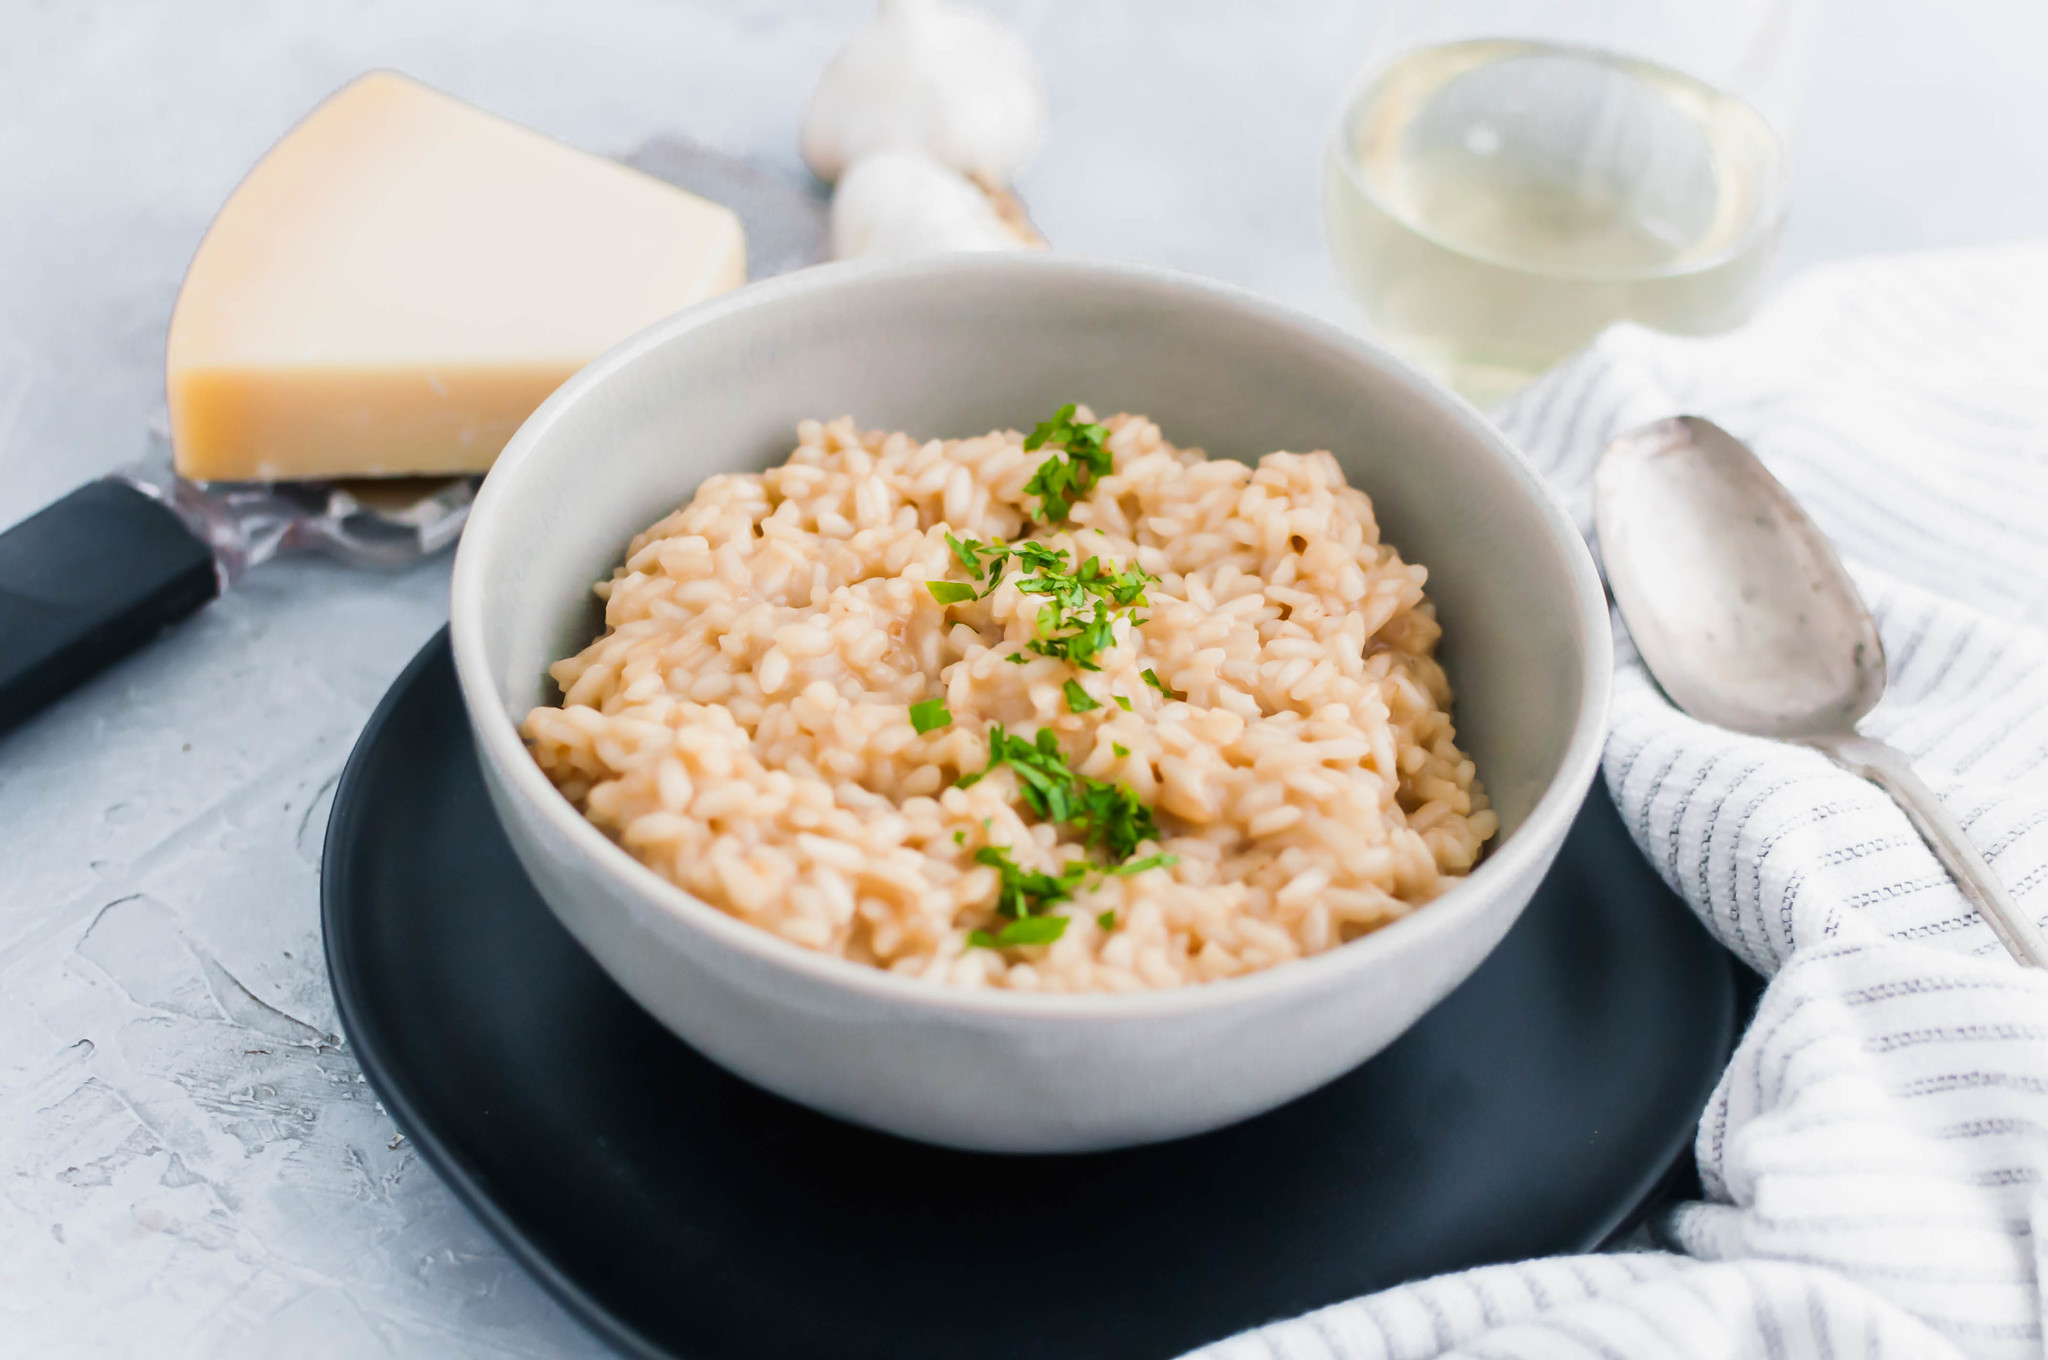 Date night in just got fancy with this Roasted Garlic Risotto. Sweet, nutty roasted garlic & classic risotto combine to make a delicious dish.